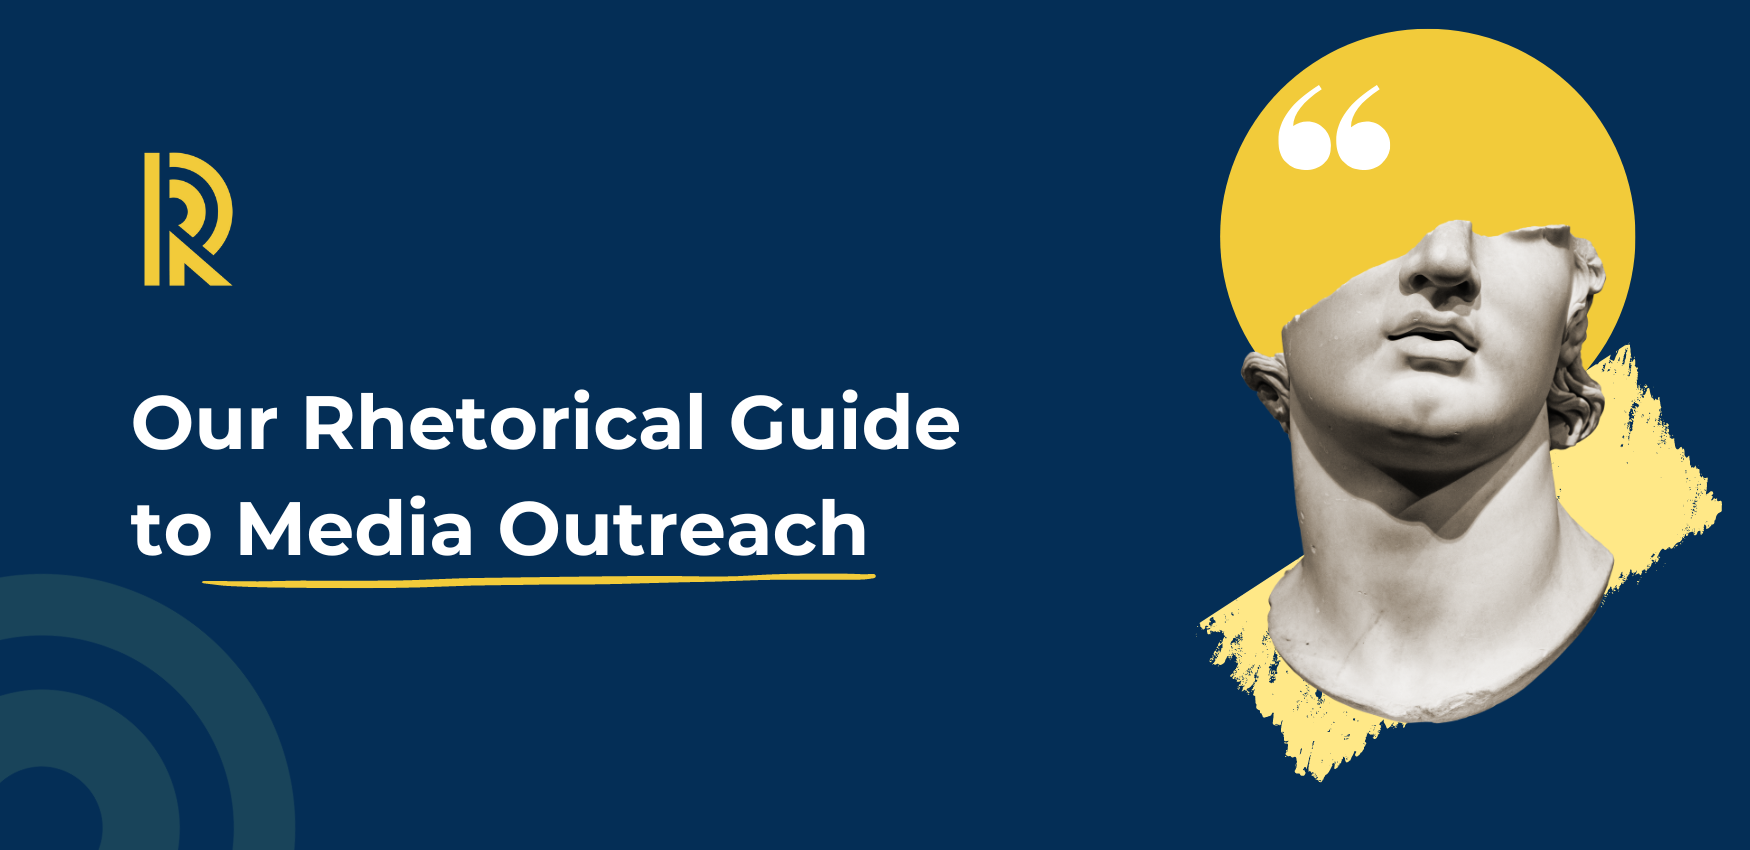 Our Guide to Media Outreach: Leveraging Rhetoric in Public Relations